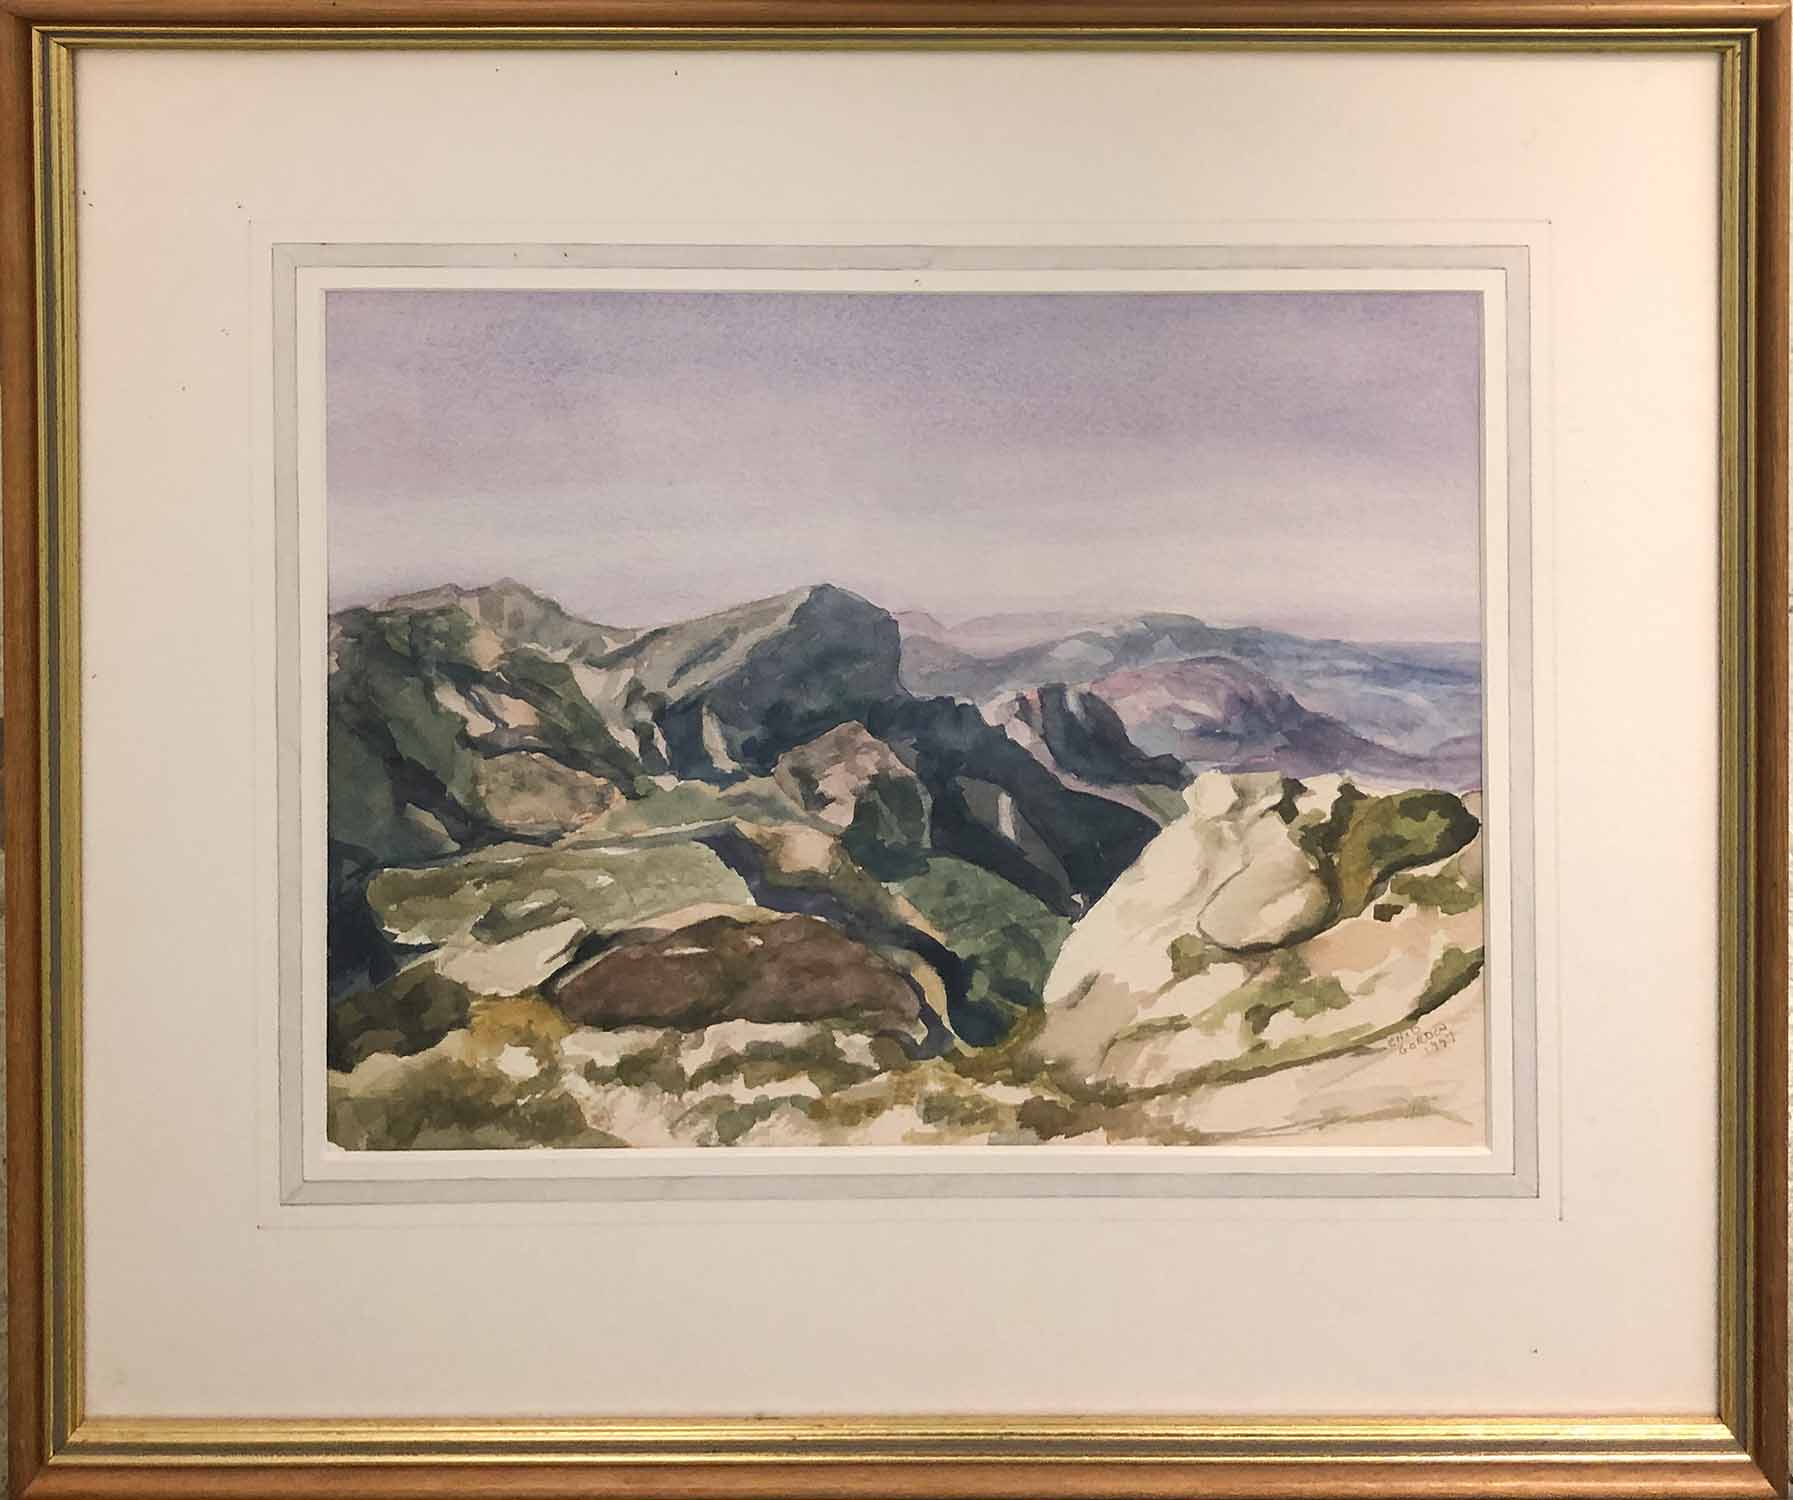 ENID GORDON 'Majorca', watercolour, signed and dated, 27cm x 35cm, framed.